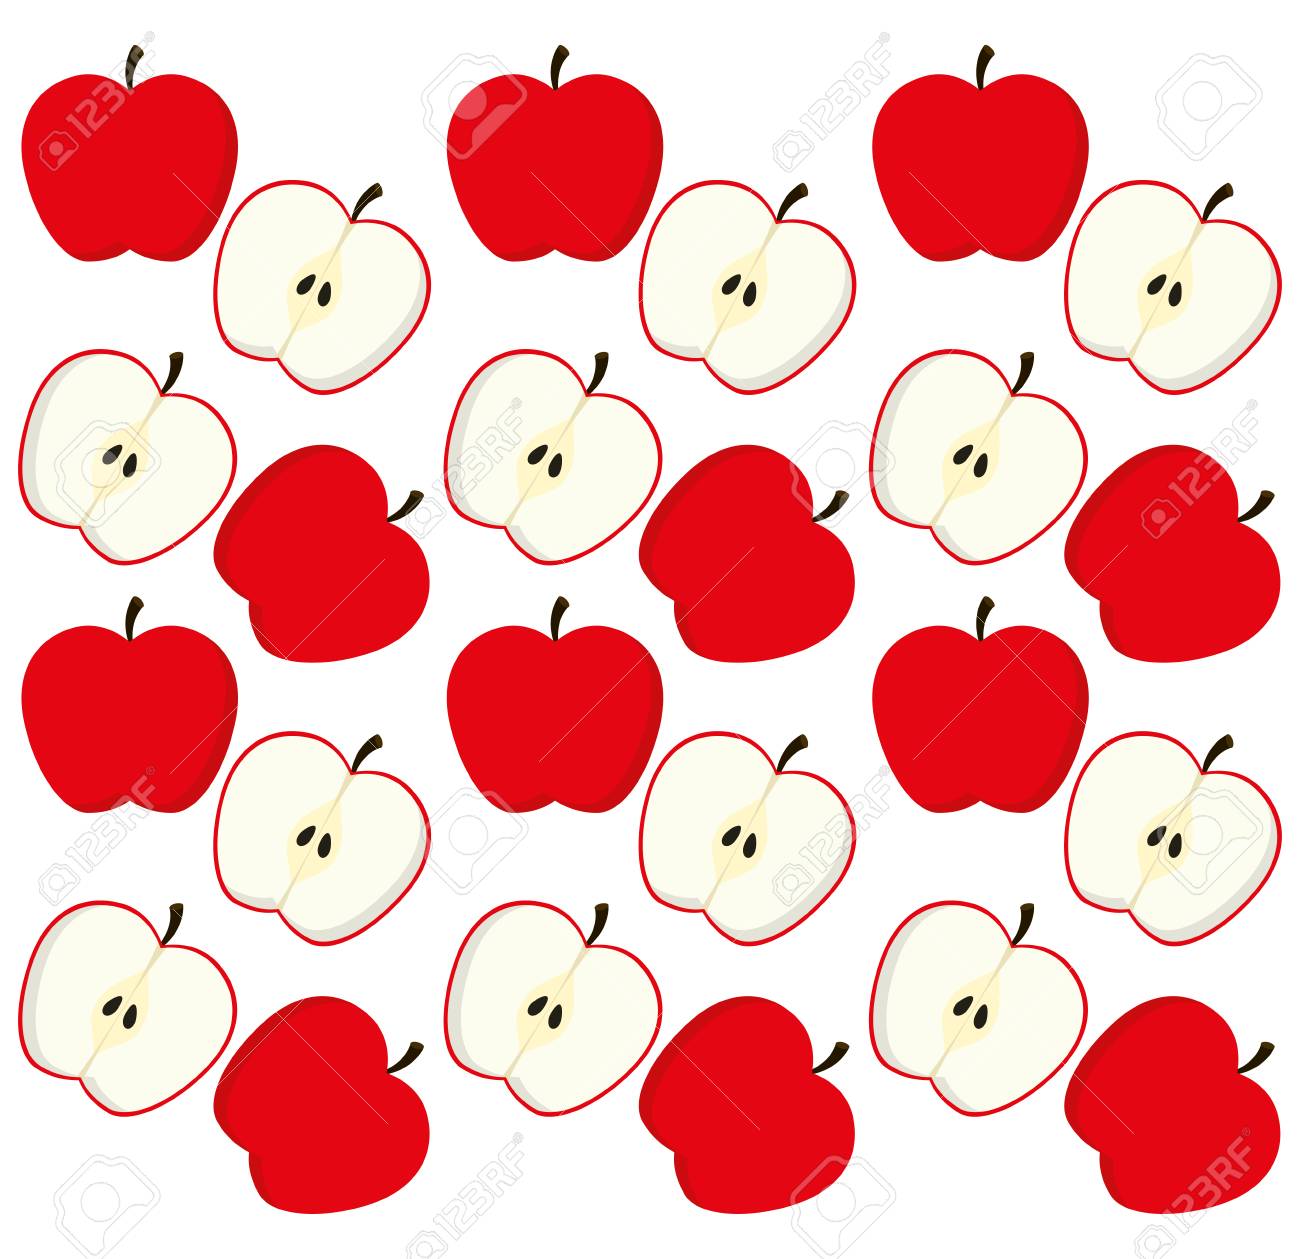 Apples Background Fruits Summer Healthy And Organic Food Theme